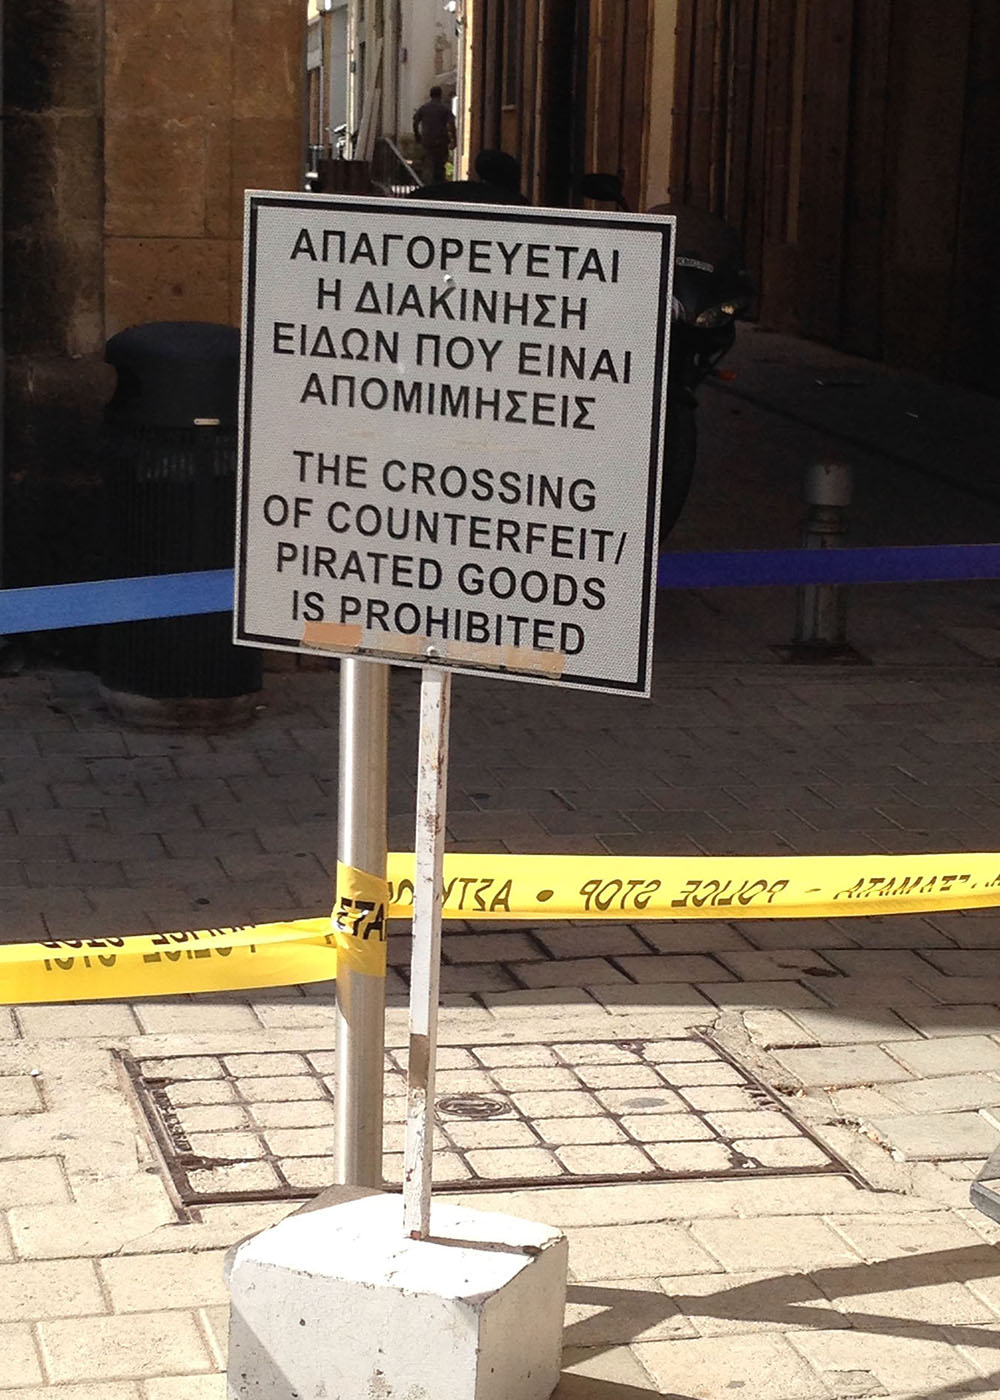 A sign at the Ledra Street checkpoint prohibiting the crossing of counterfeit goods into Nicosia’s south. Photo by Rebecca Bryant.